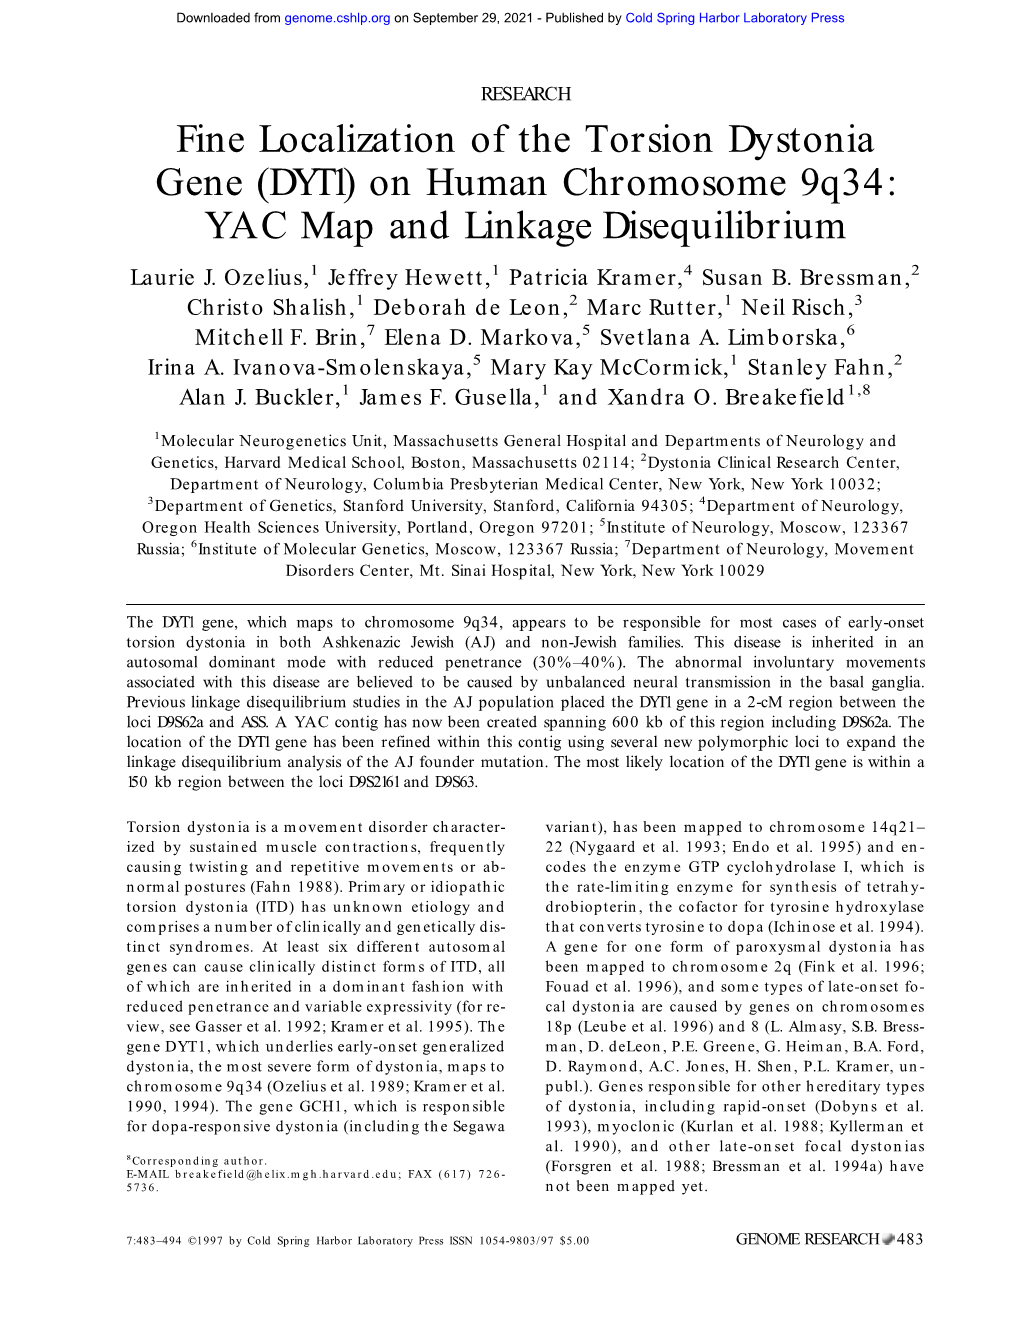 Fine Localization of the Torsion Dystonia Gene (DYT1) on Human Chromosome 9Q34: YAC Map and Linkage Disequilibrium Laurie J